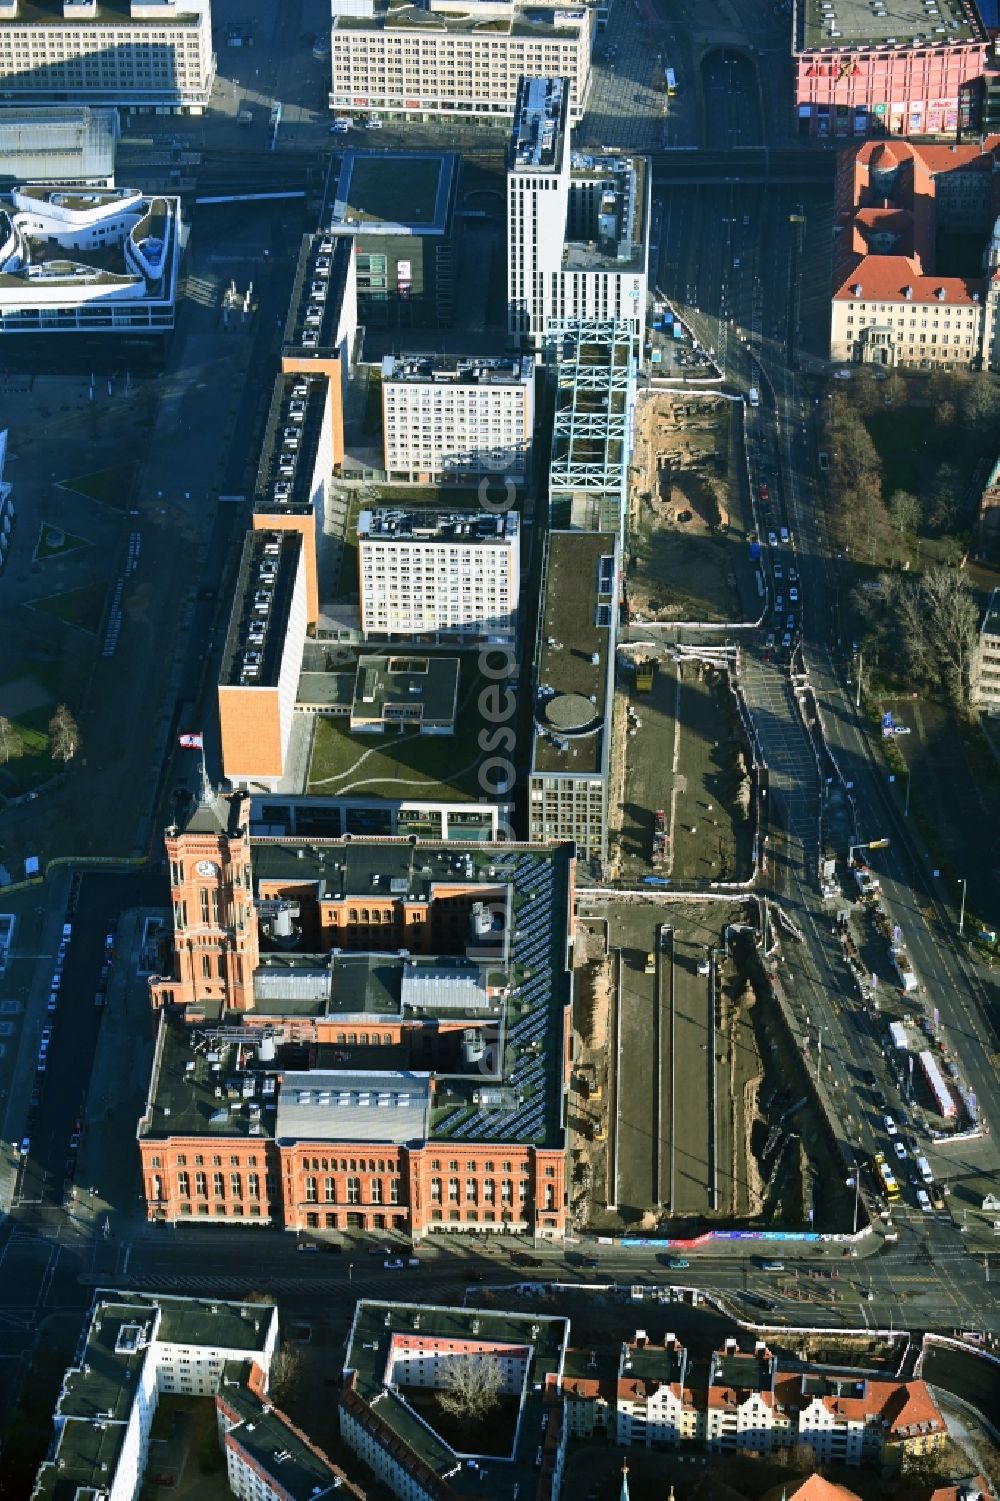 Berlin from the bird's eye view: Construction site with development works and embankments works as part of the reconstruction project on Molkenmarkt overlooking Rotes Rathaus along the Grunerstrasse in the district Mitte in Berlin, Germany